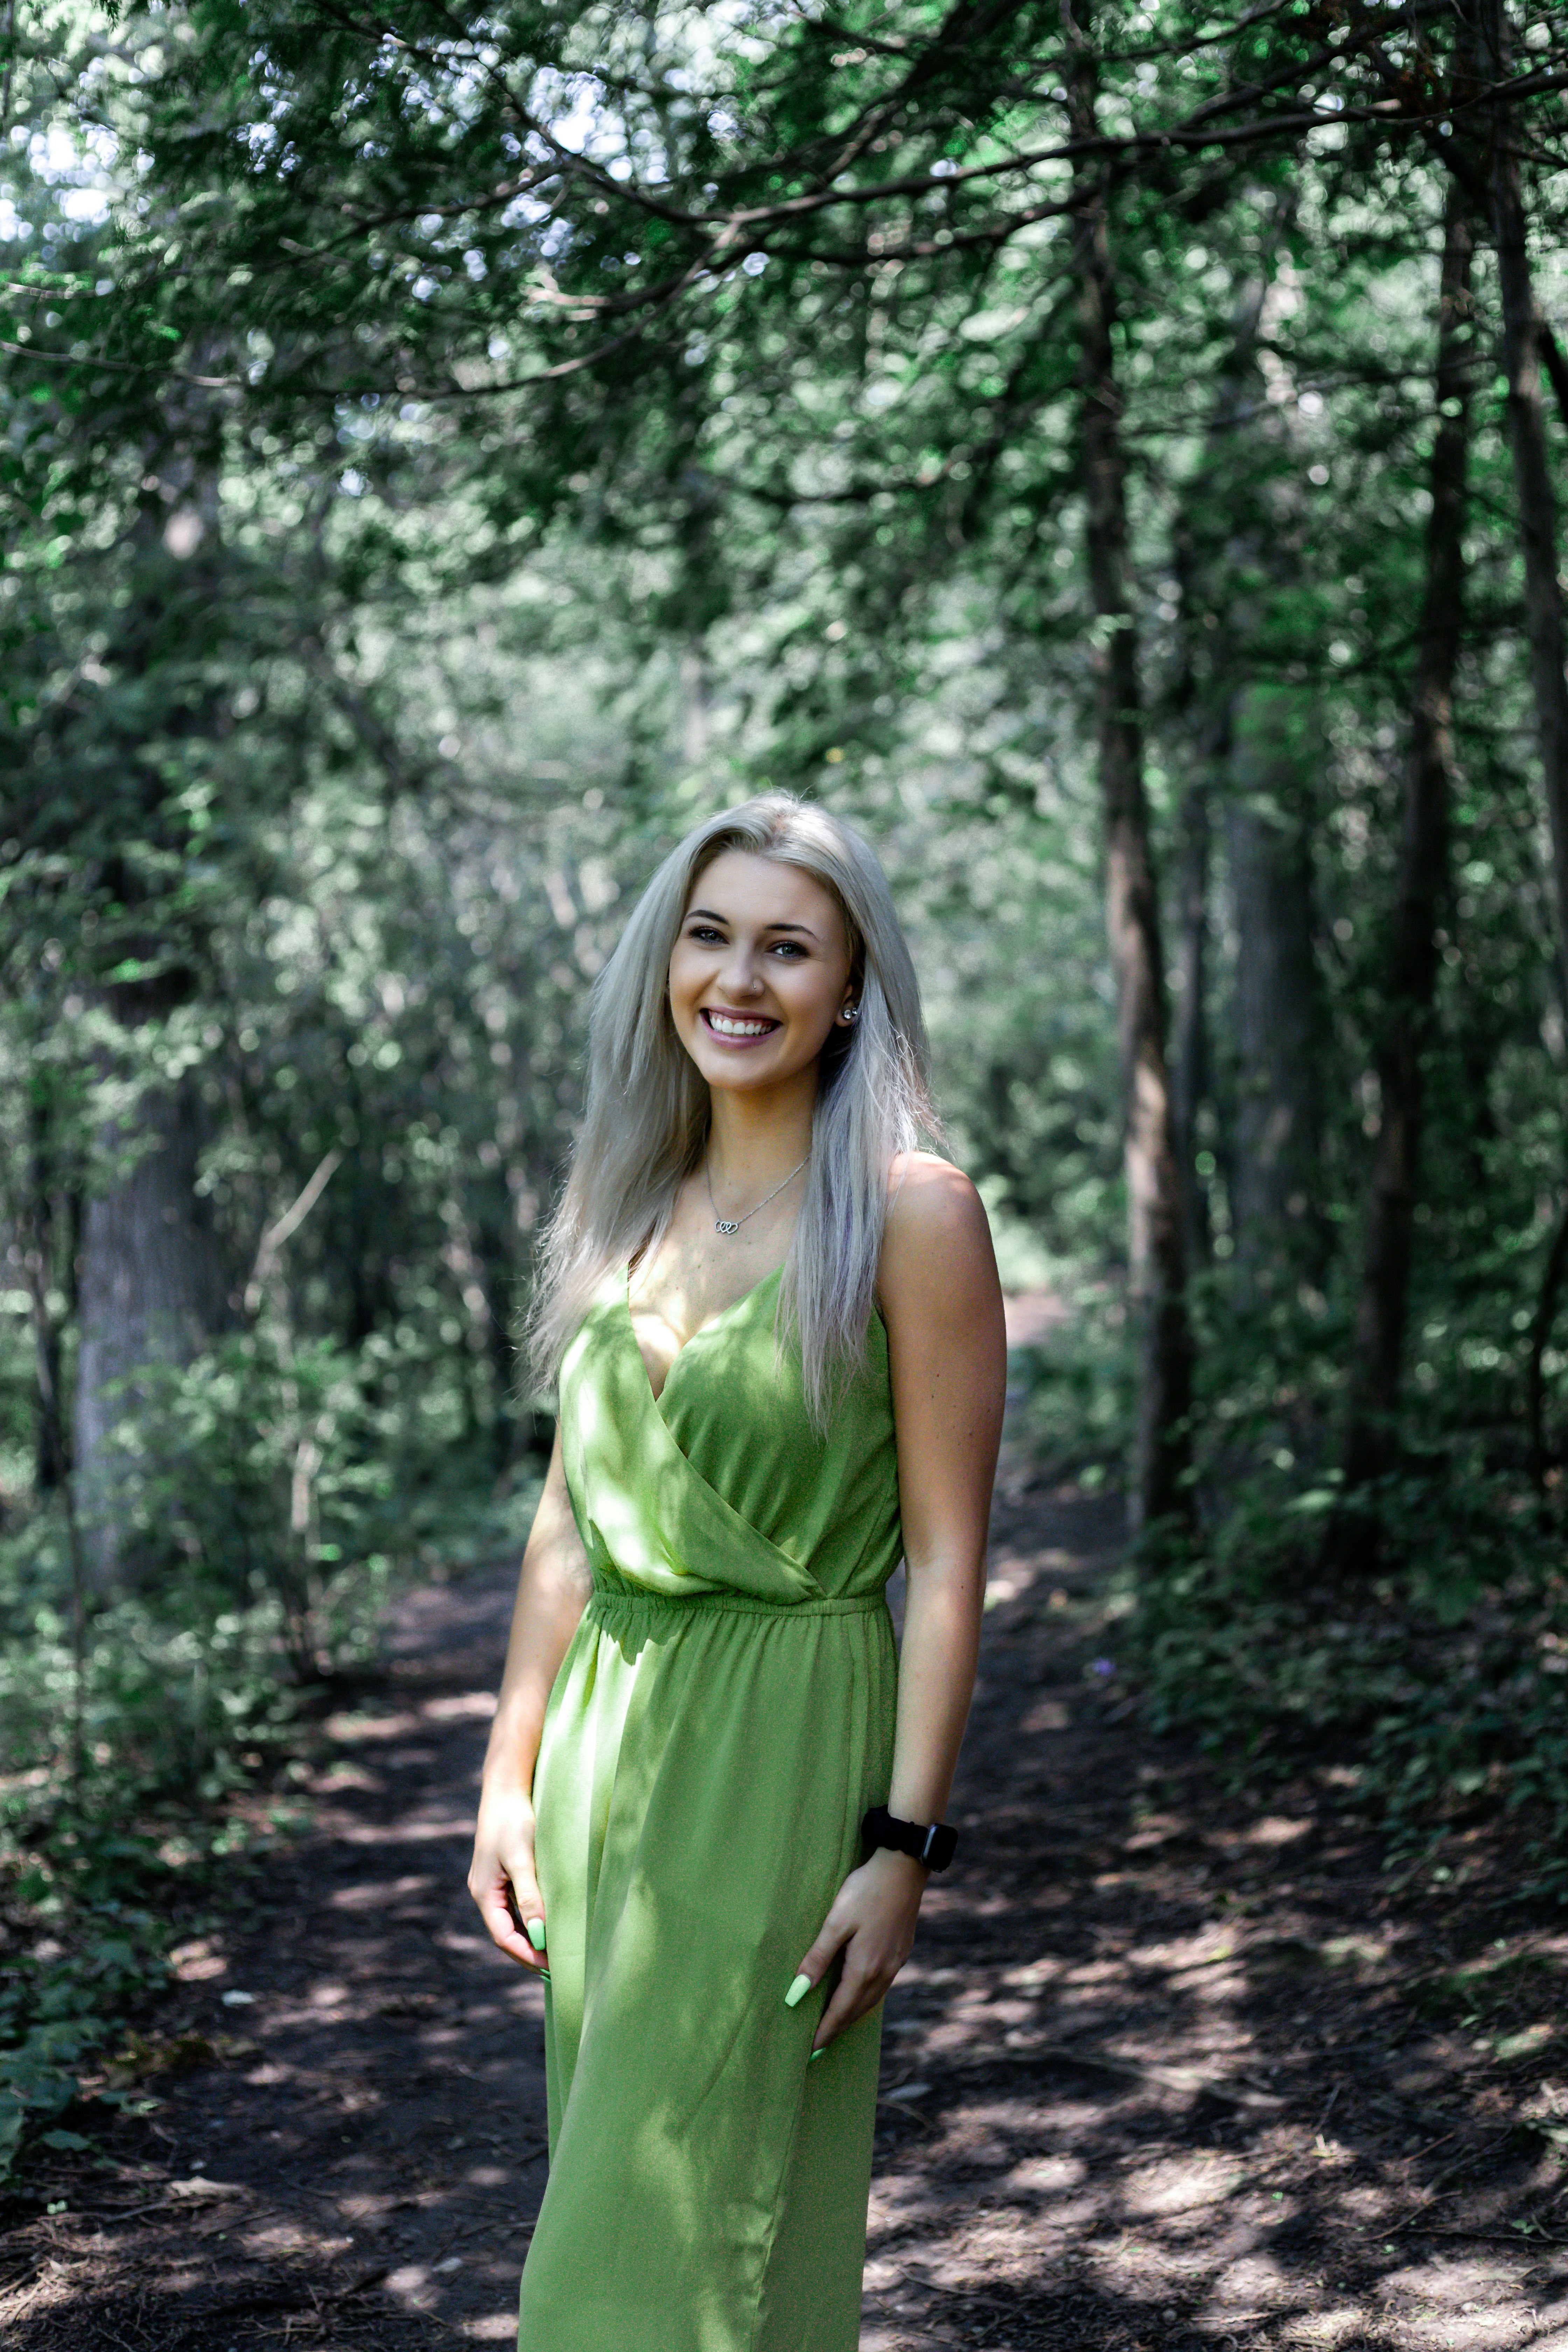 woman in green sleeveless dress standing in forest during daytime